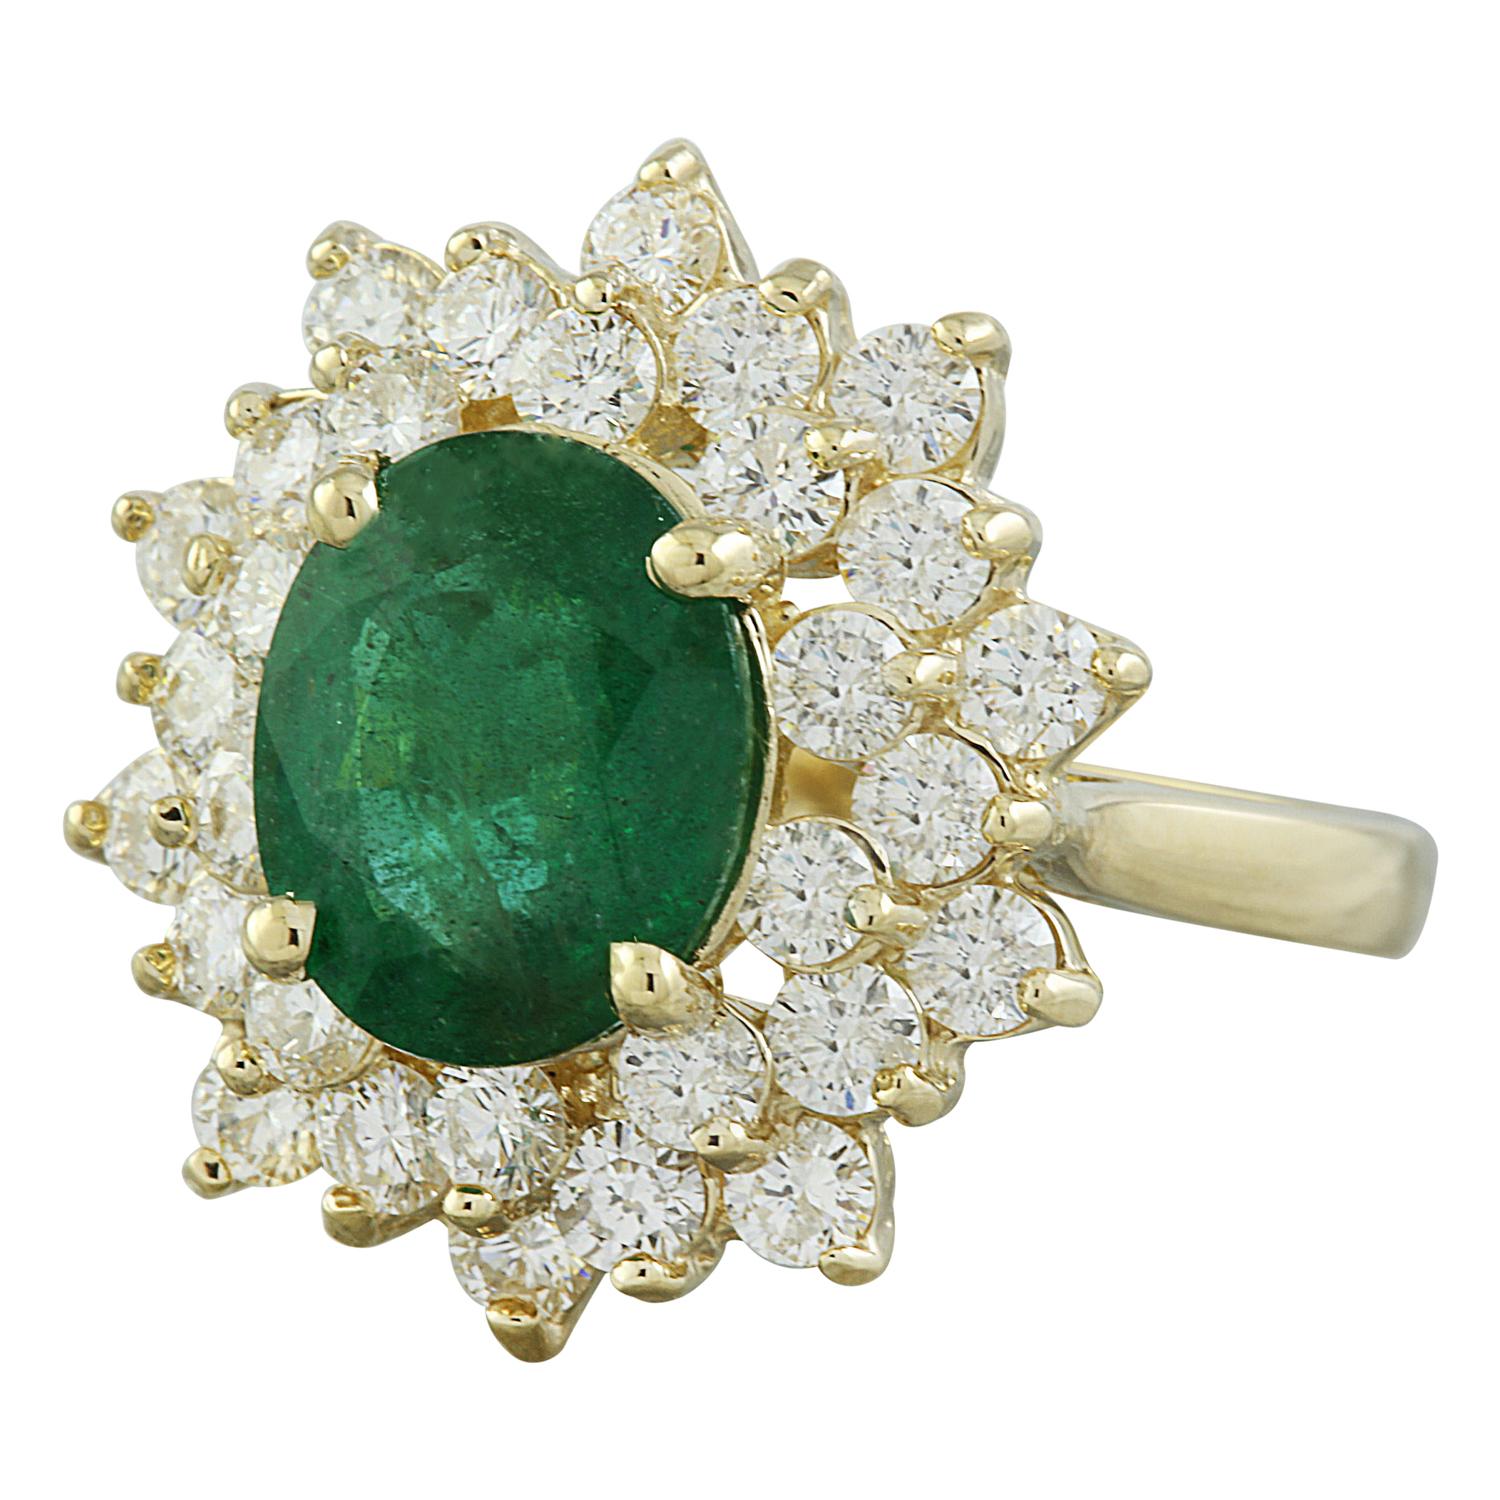 Introducing our opulent Natural Emerald Diamond Ring, meticulously crafted in luxurious 14K Solid Yellow Gold. This exquisite piece is a true embodiment of elegance and sophistication, destined to become a cherished heirloom in your jewelry